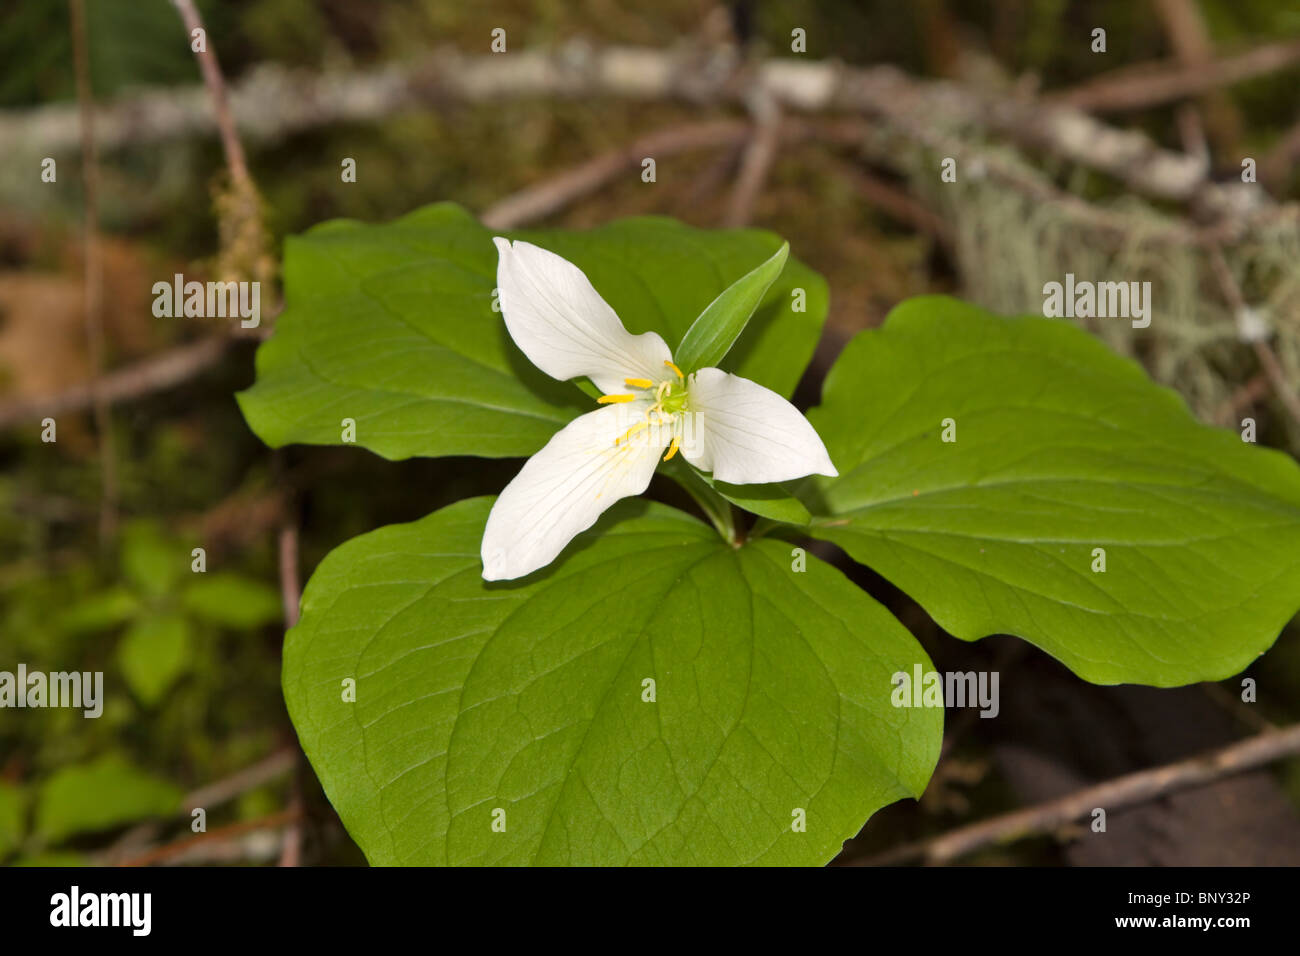 Western Wake Robin, Trillium ovatum. A wildflower found on the forest floor in the Pacific Northwest USA and Canada Stock Photo